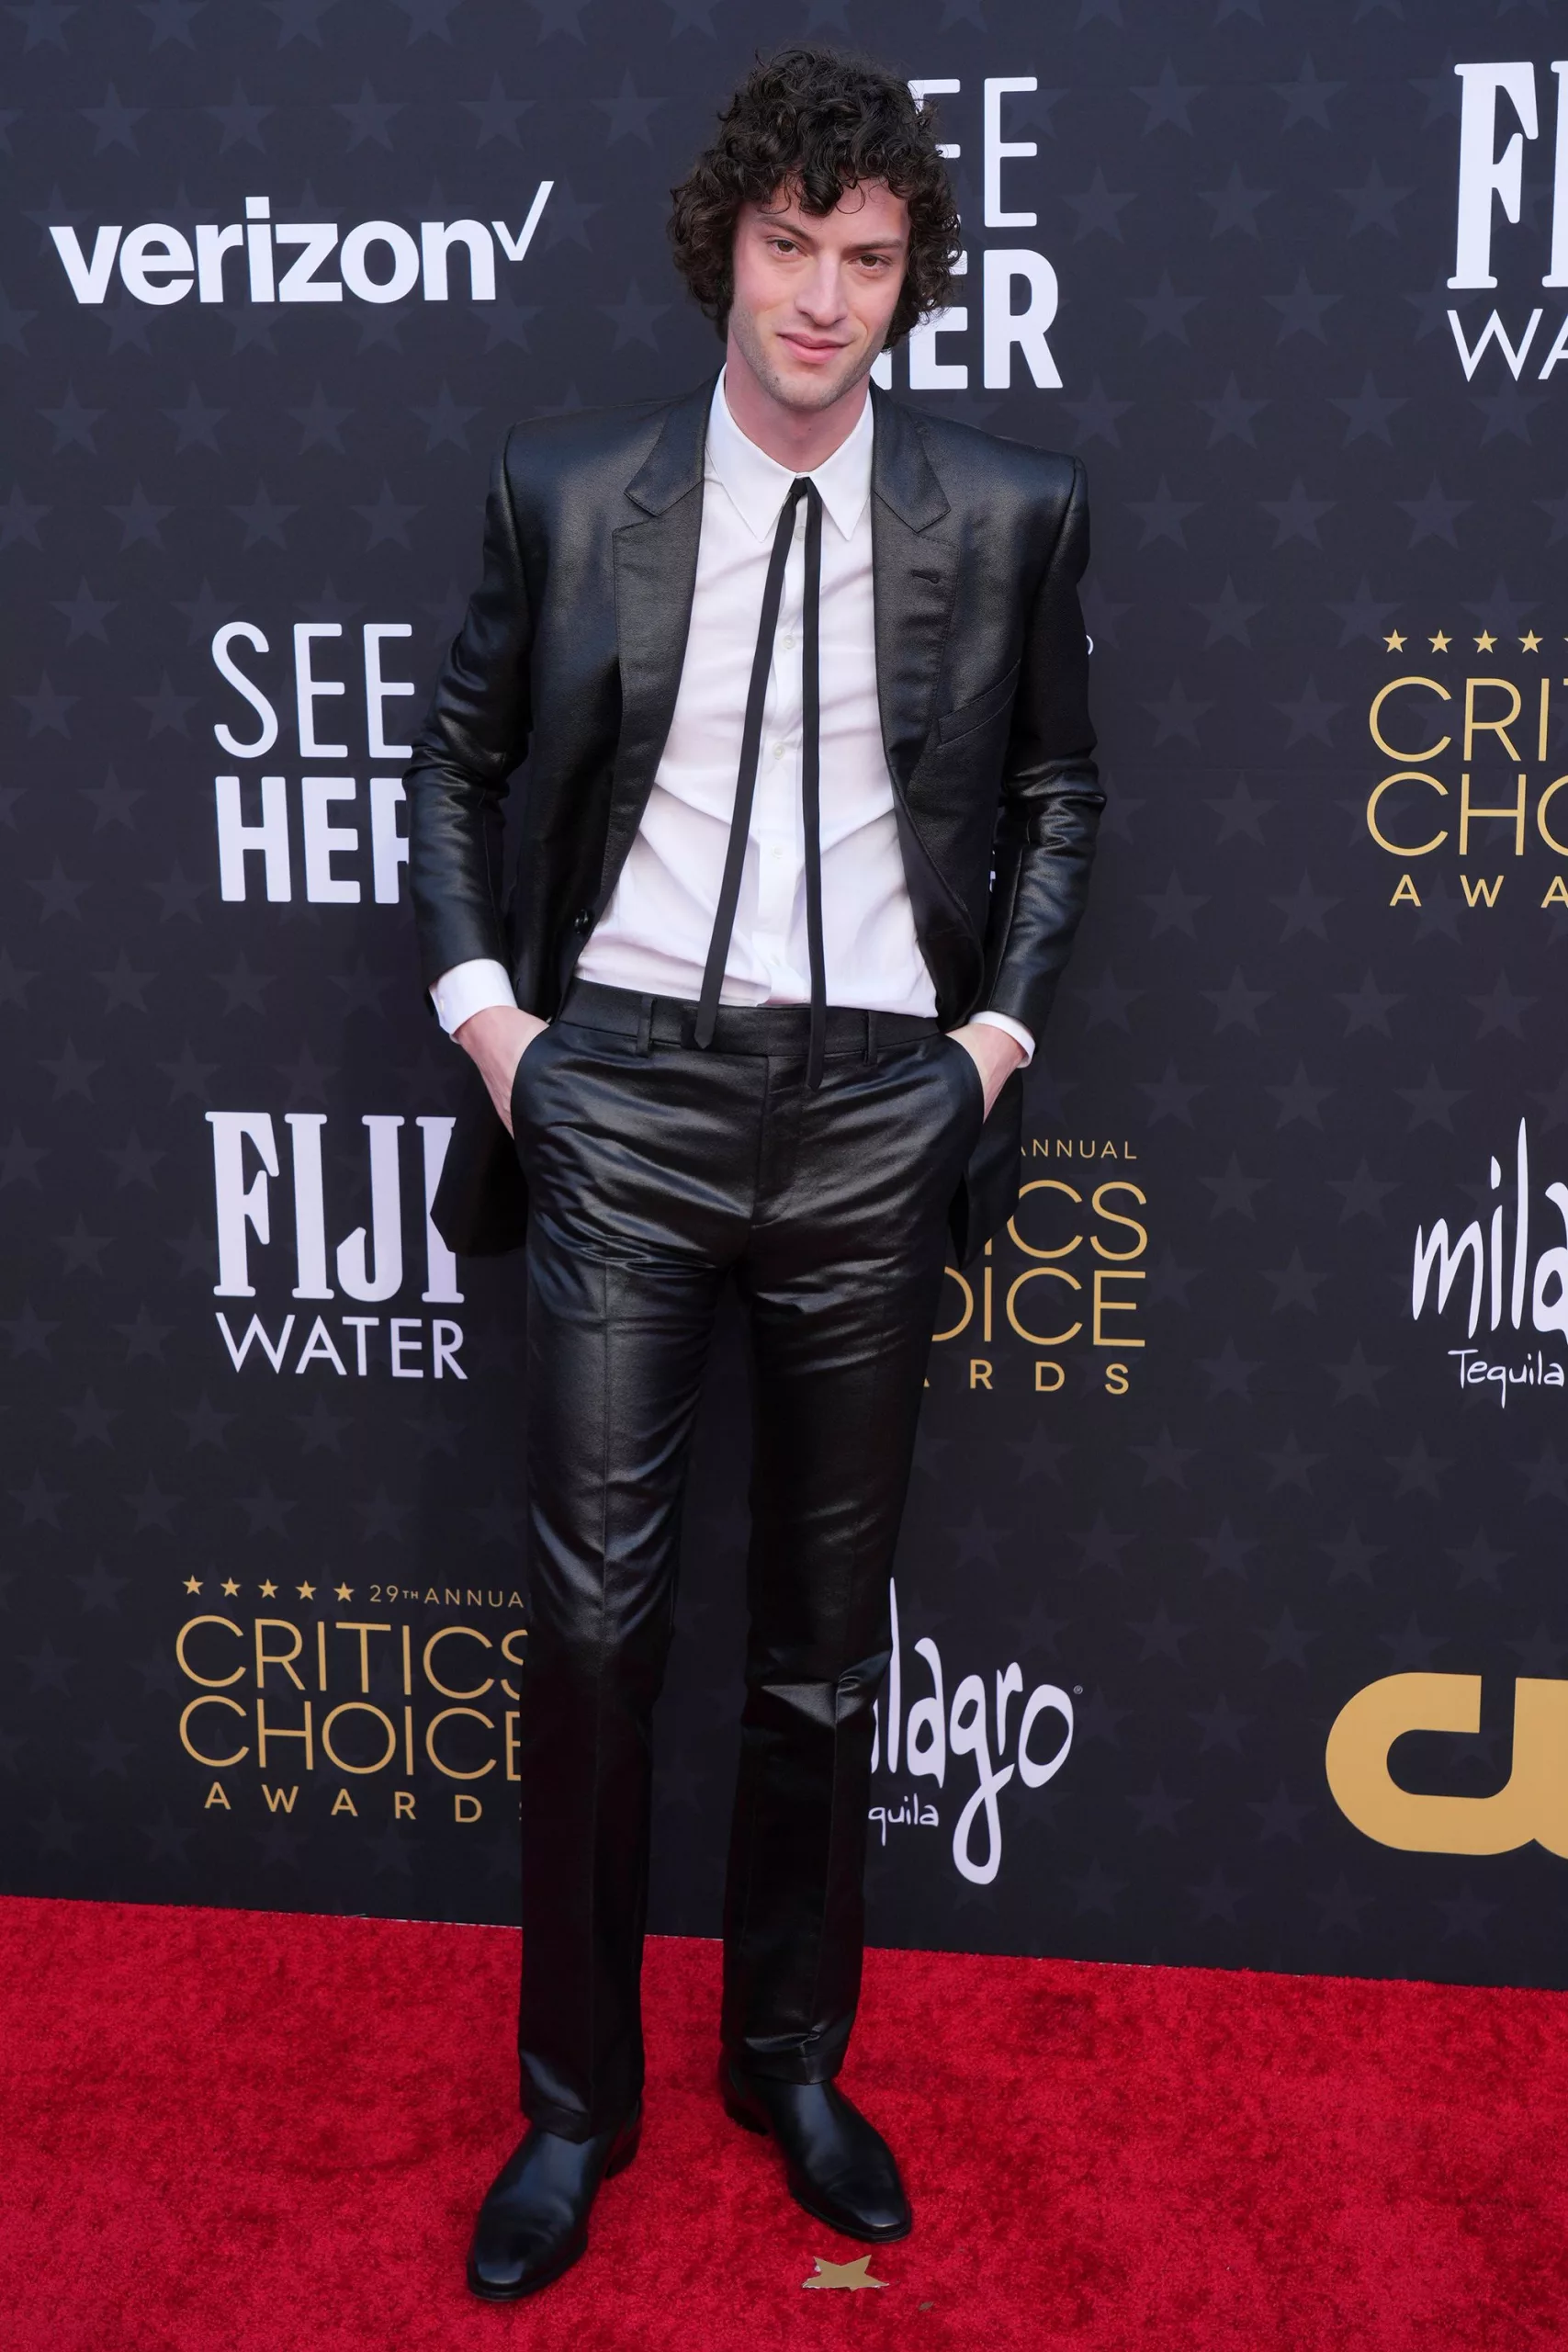 Dominic Sessa, who went on to take the Best Young Actor awward, wore a Celine Homme outfit featuring a straight-collar jacket, matching pants and calfskin Chelsea boots.